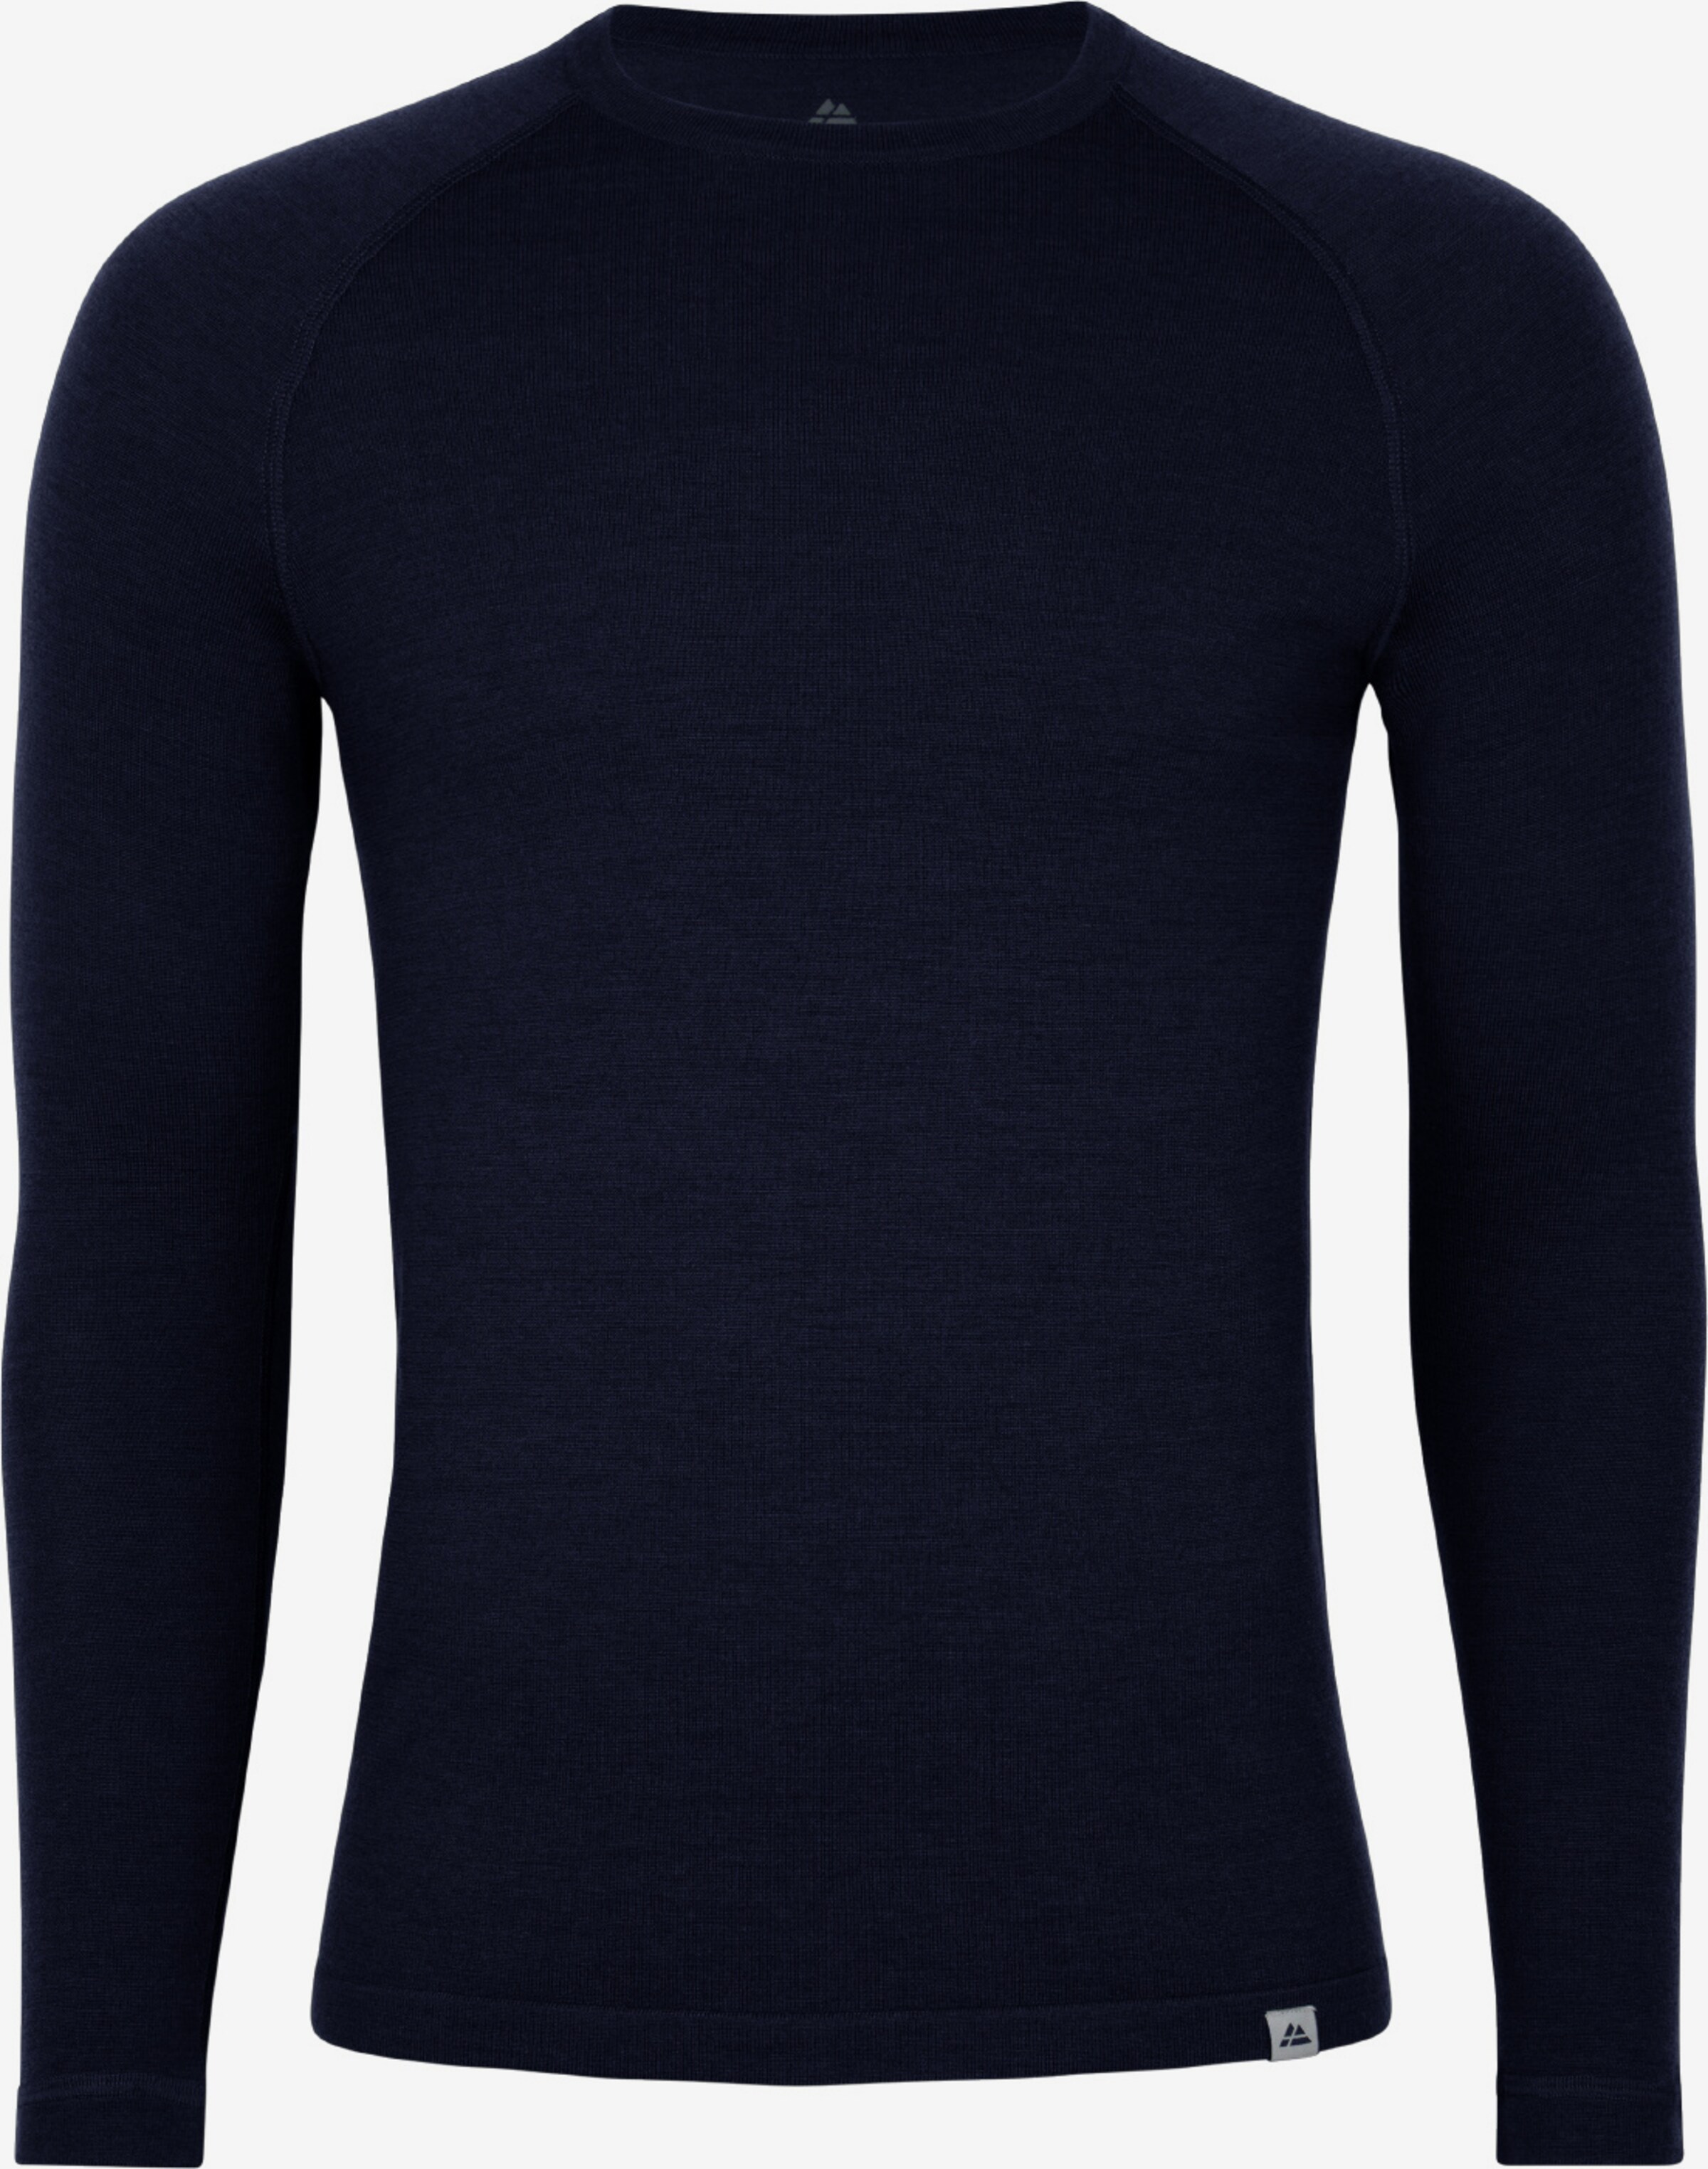 ABOUT Danish | Navy in YOU Endurance Funktionsshirt